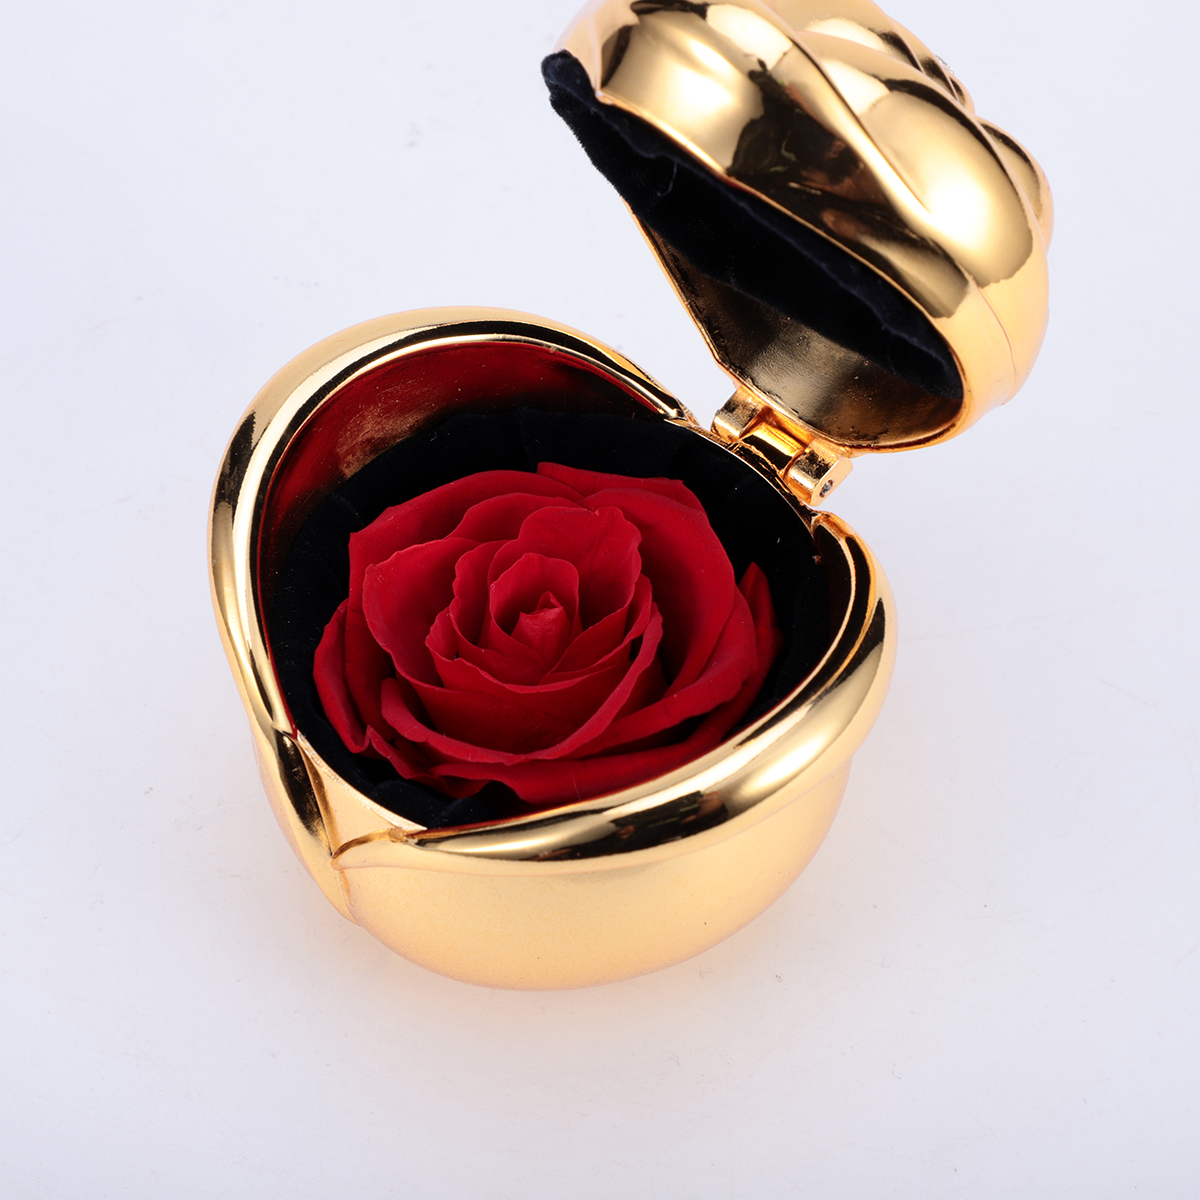 DYstyle Preserved Roses Flowers in Gift Box Romantic Gifts for Thanks Giving Female Valentine's Day - image 1 of 4